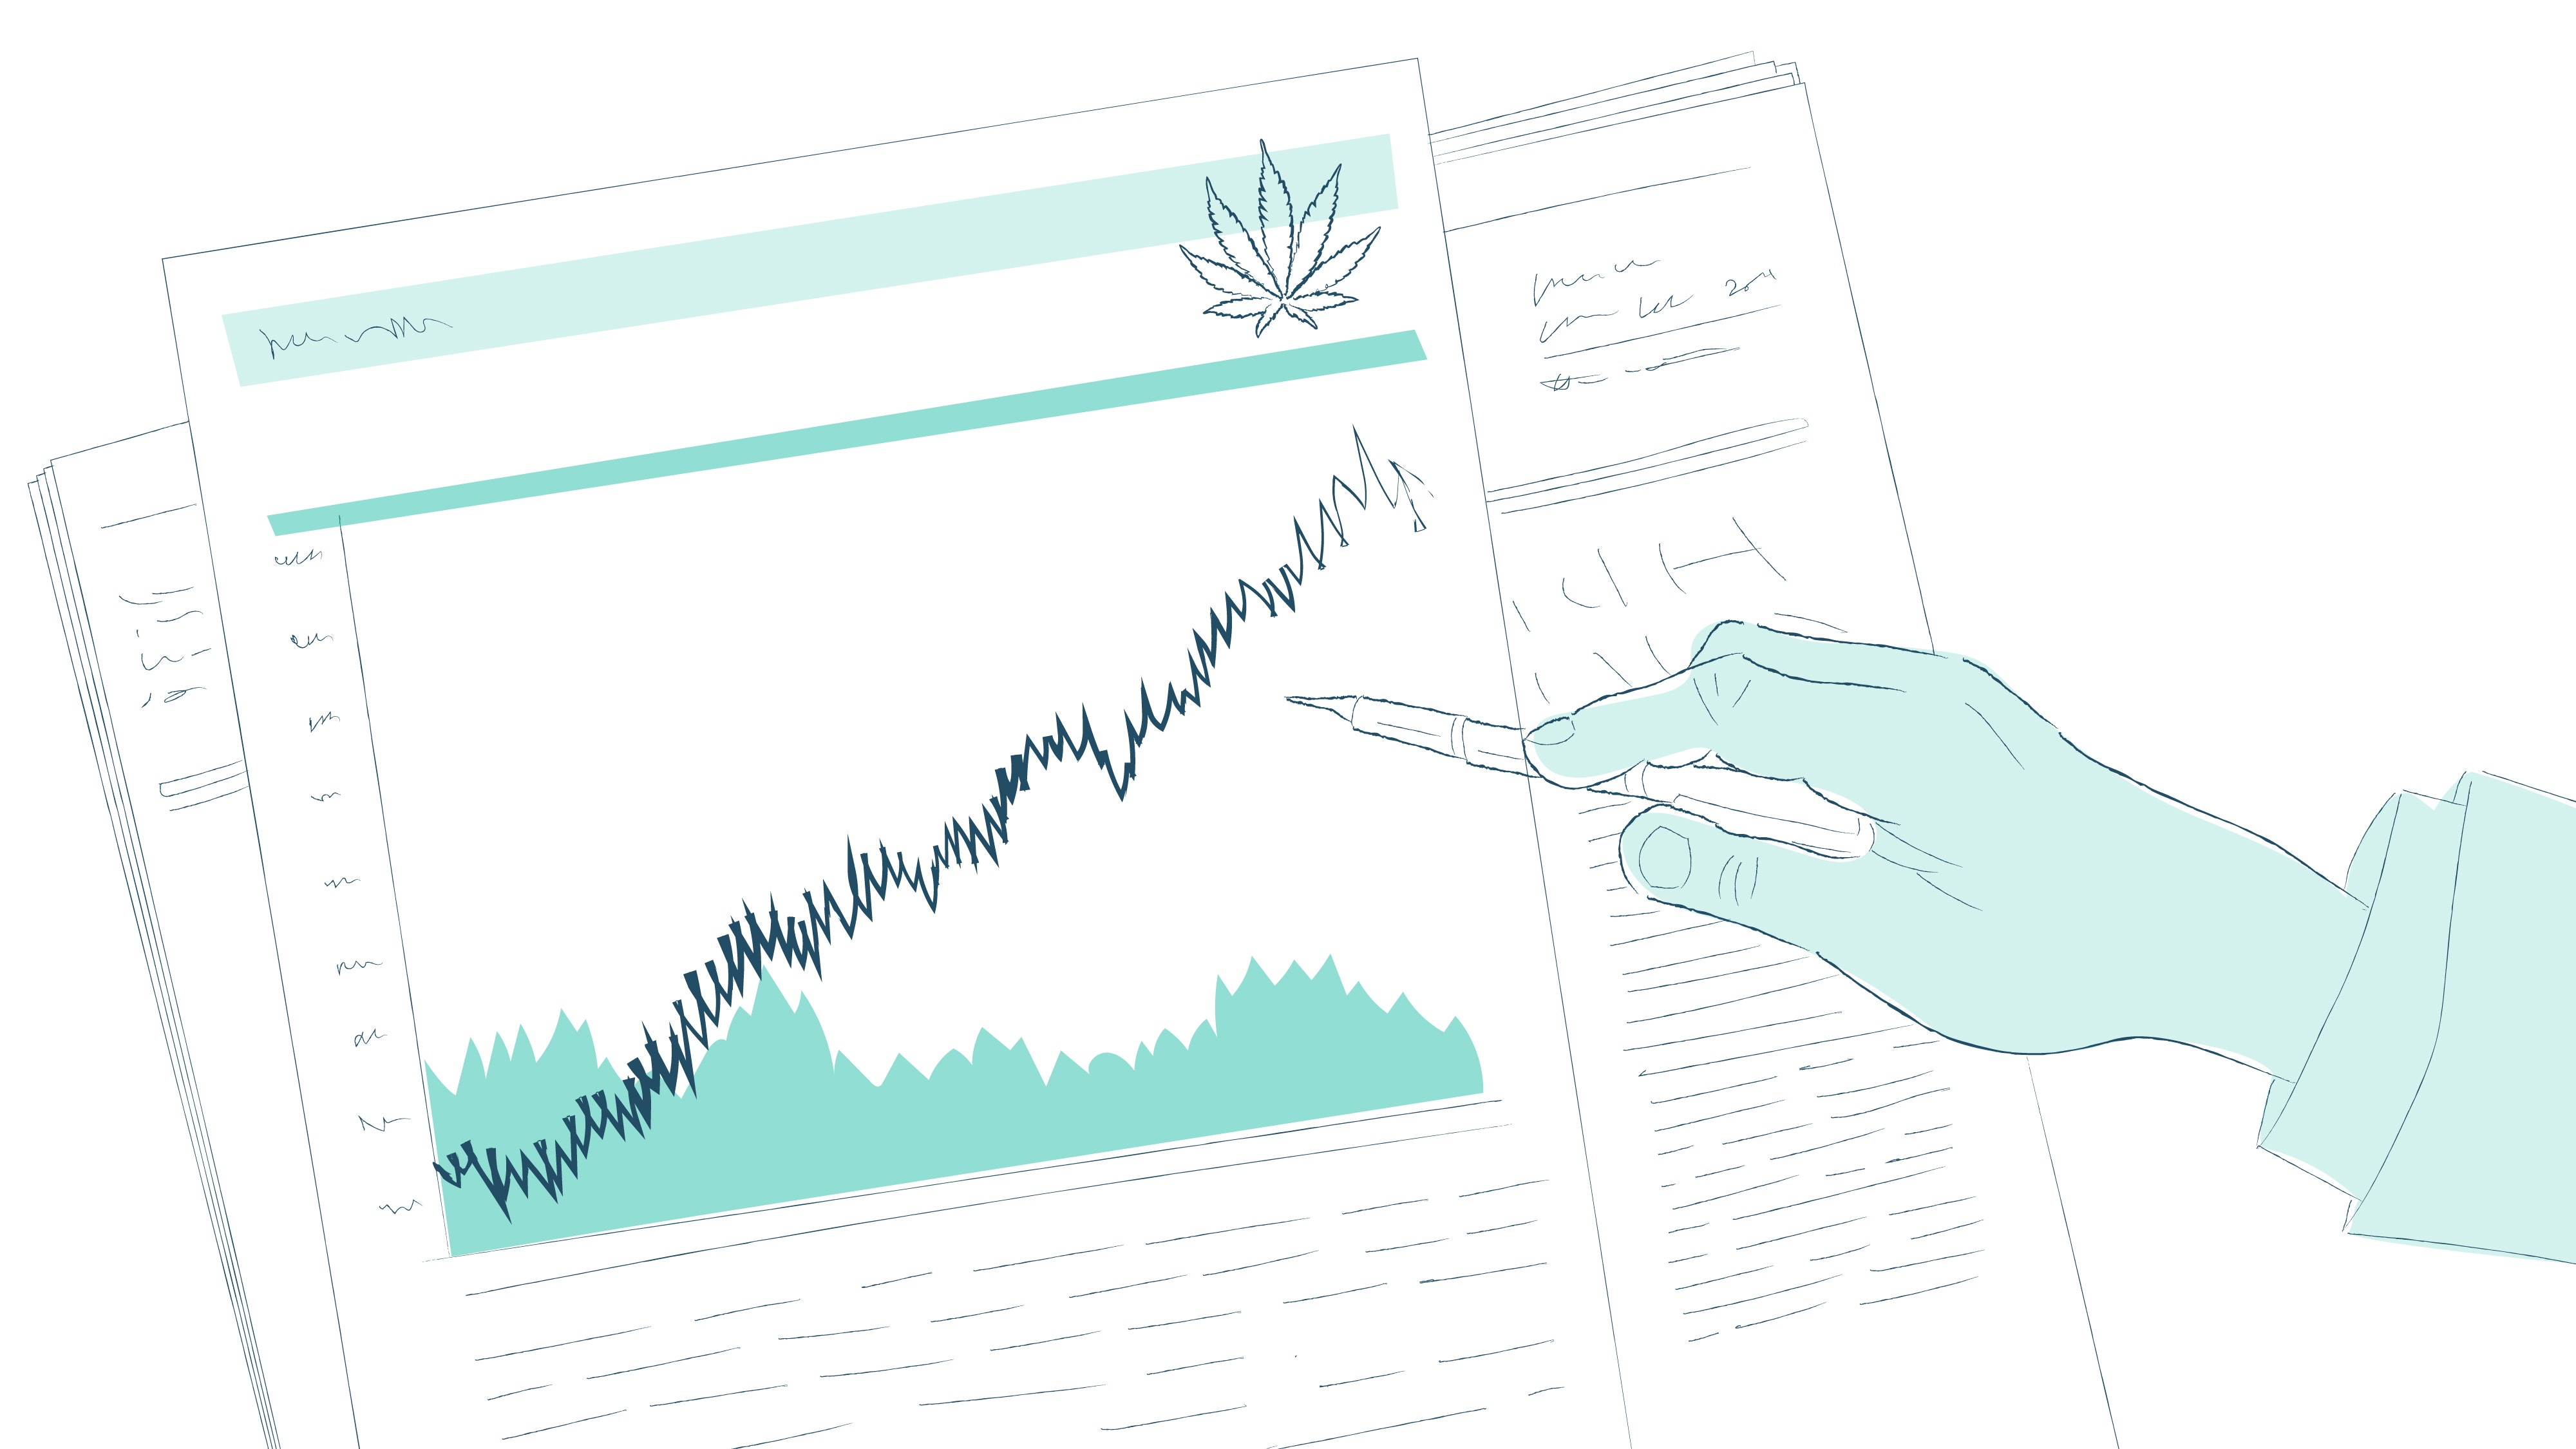 Cannabis Co. Driven By Stem (STMH) Announces Record Sales, Gross Margin For Q3